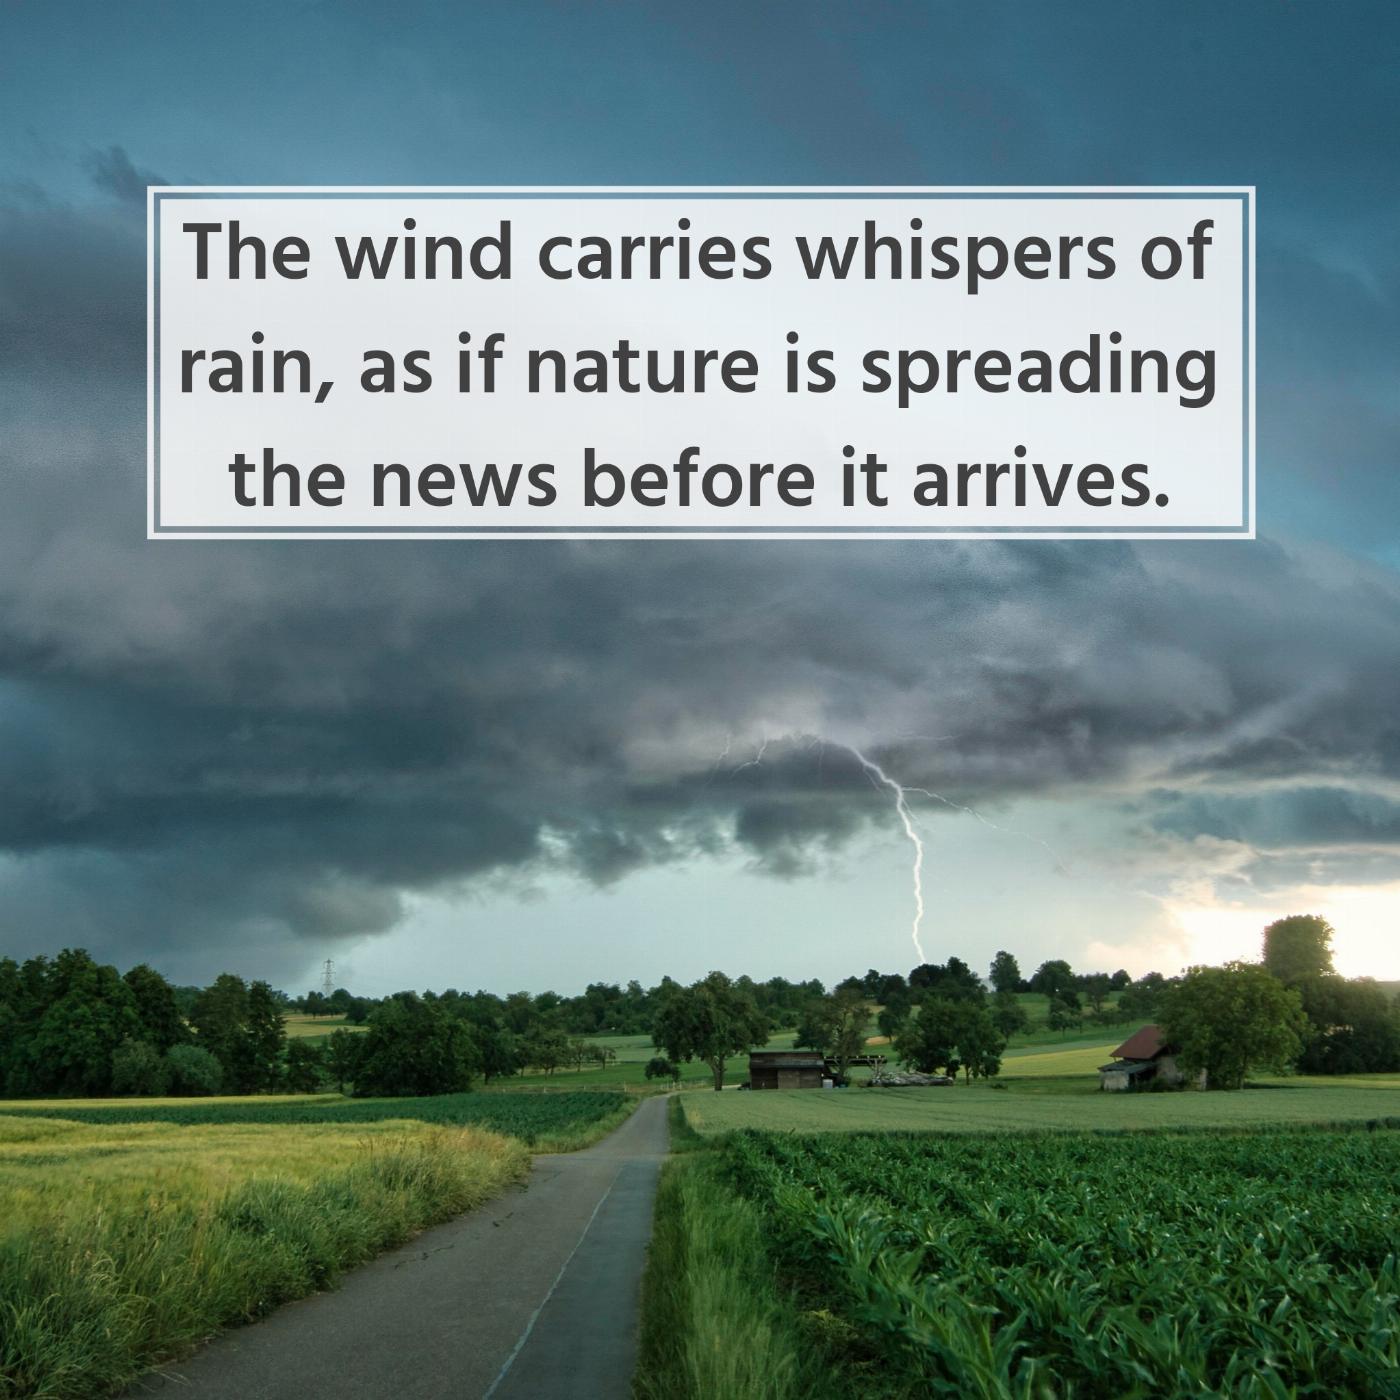 The wind carries whispers of rain as if nature is spreading the news